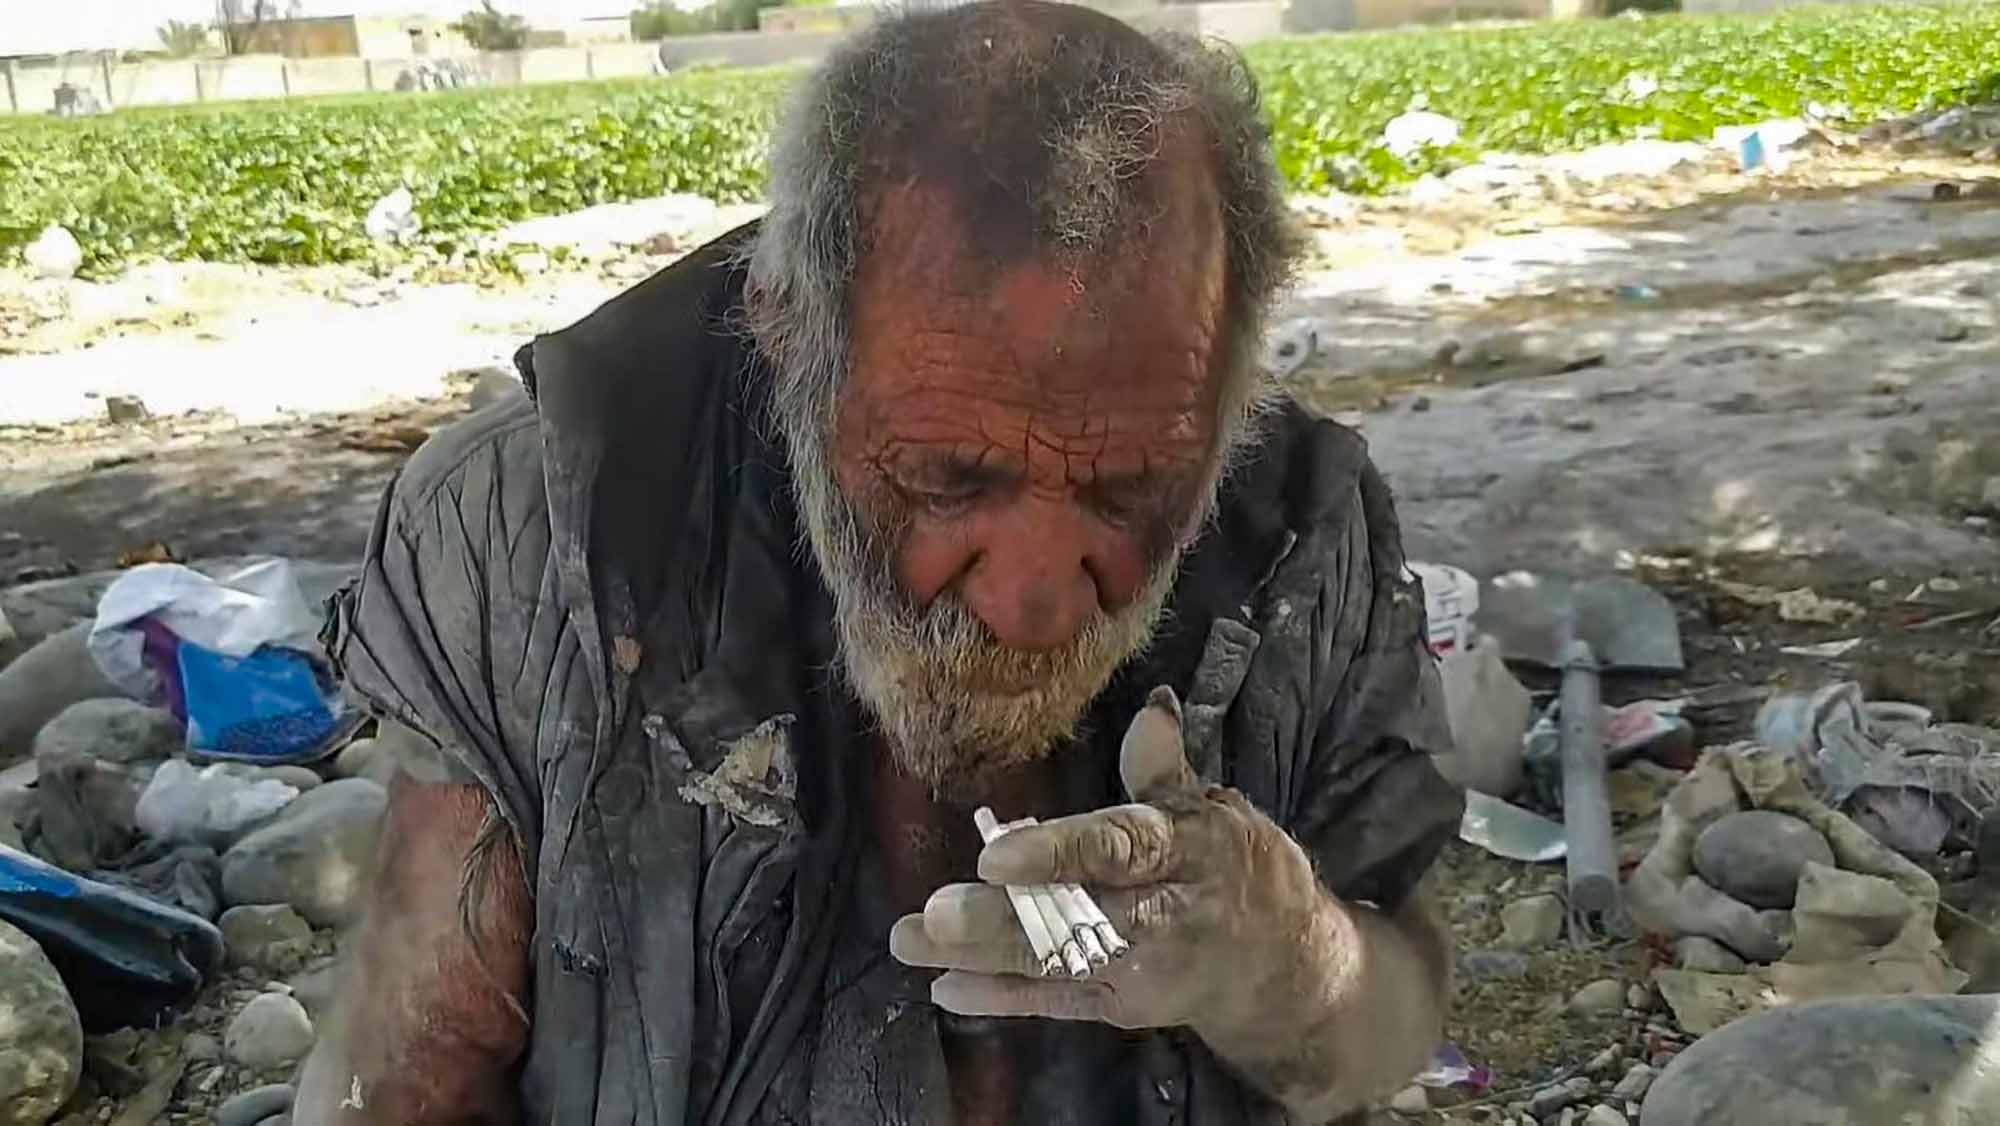 Read more about the article World’s Dirtiest Man Who Refused To Bath Because It Would Make Him Sick Dies After Washing